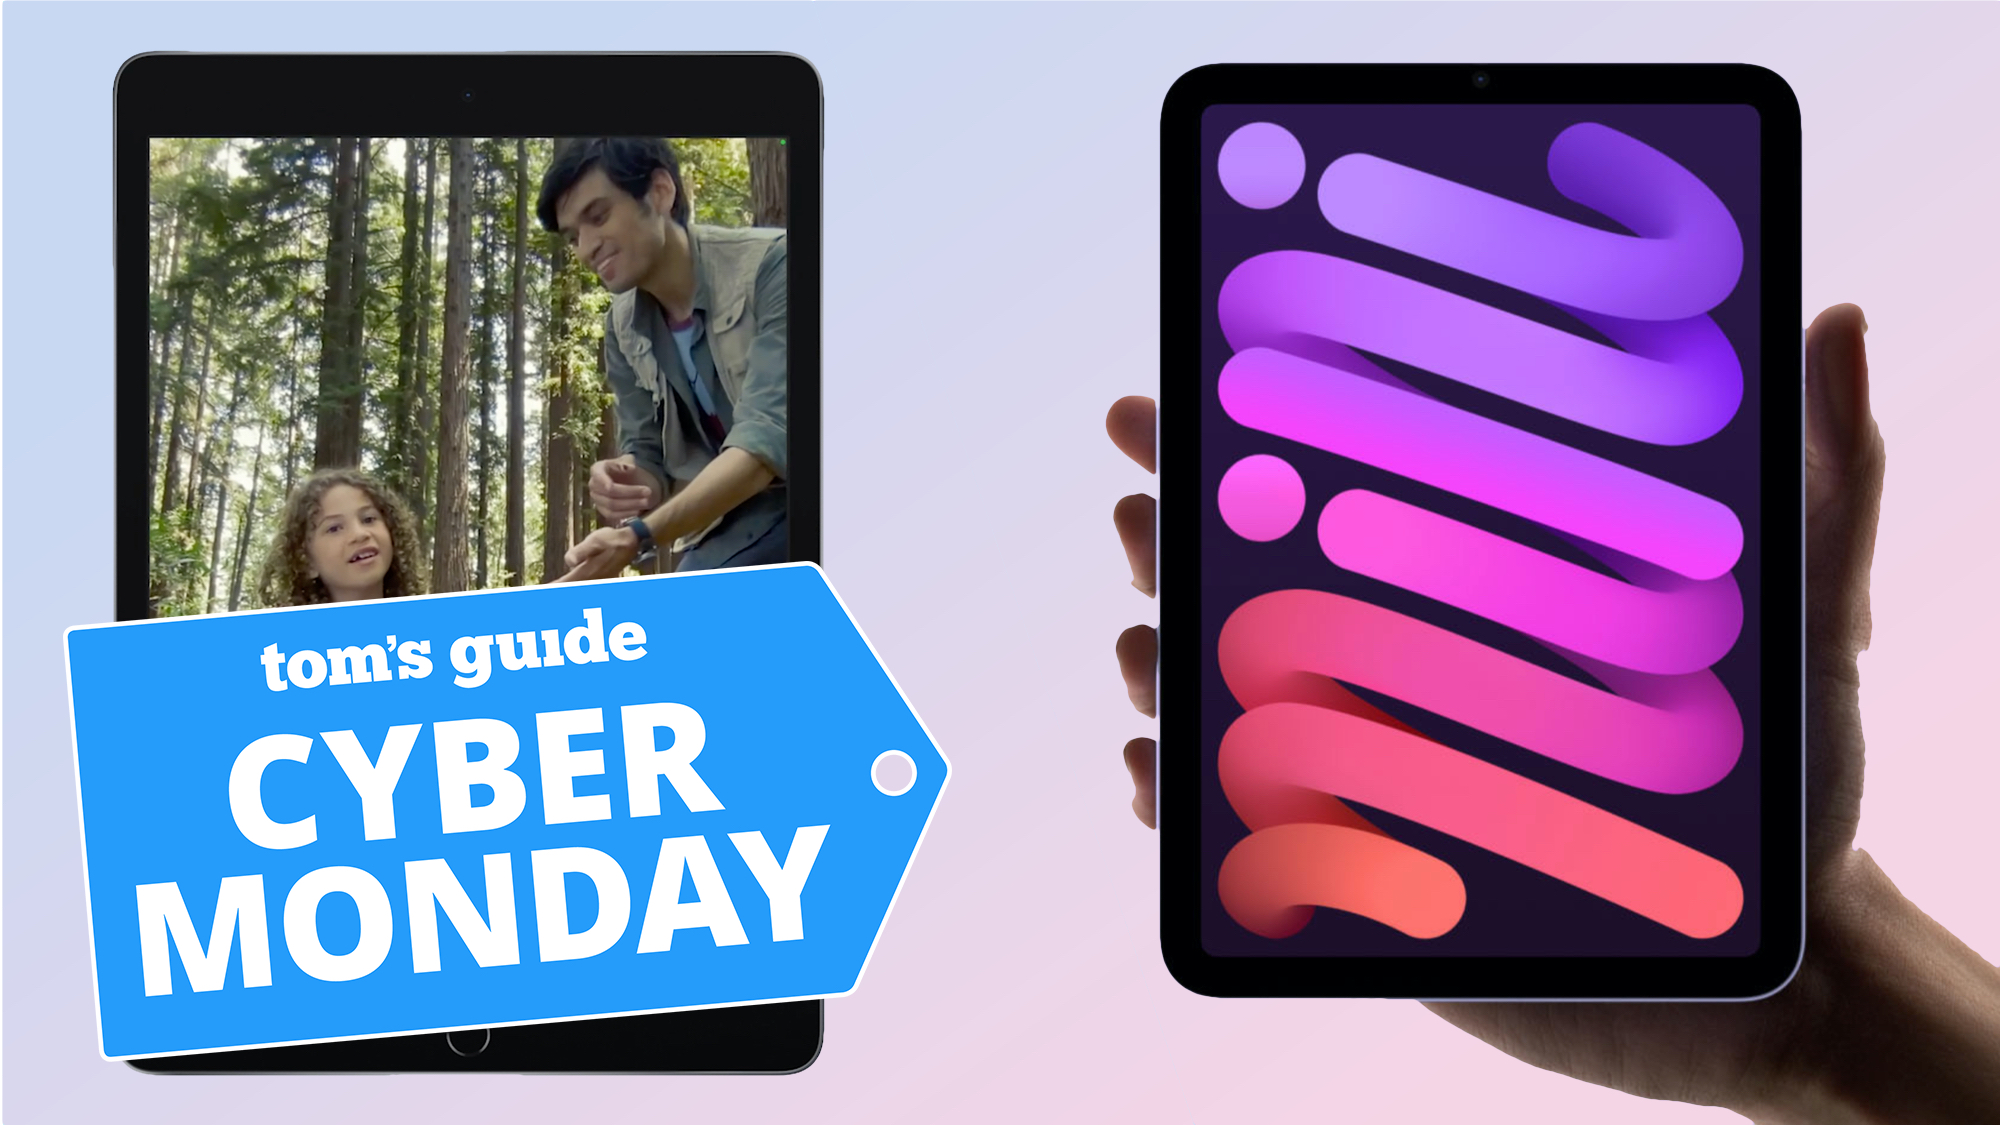 Two iPad minis with the Cyber Monday badge